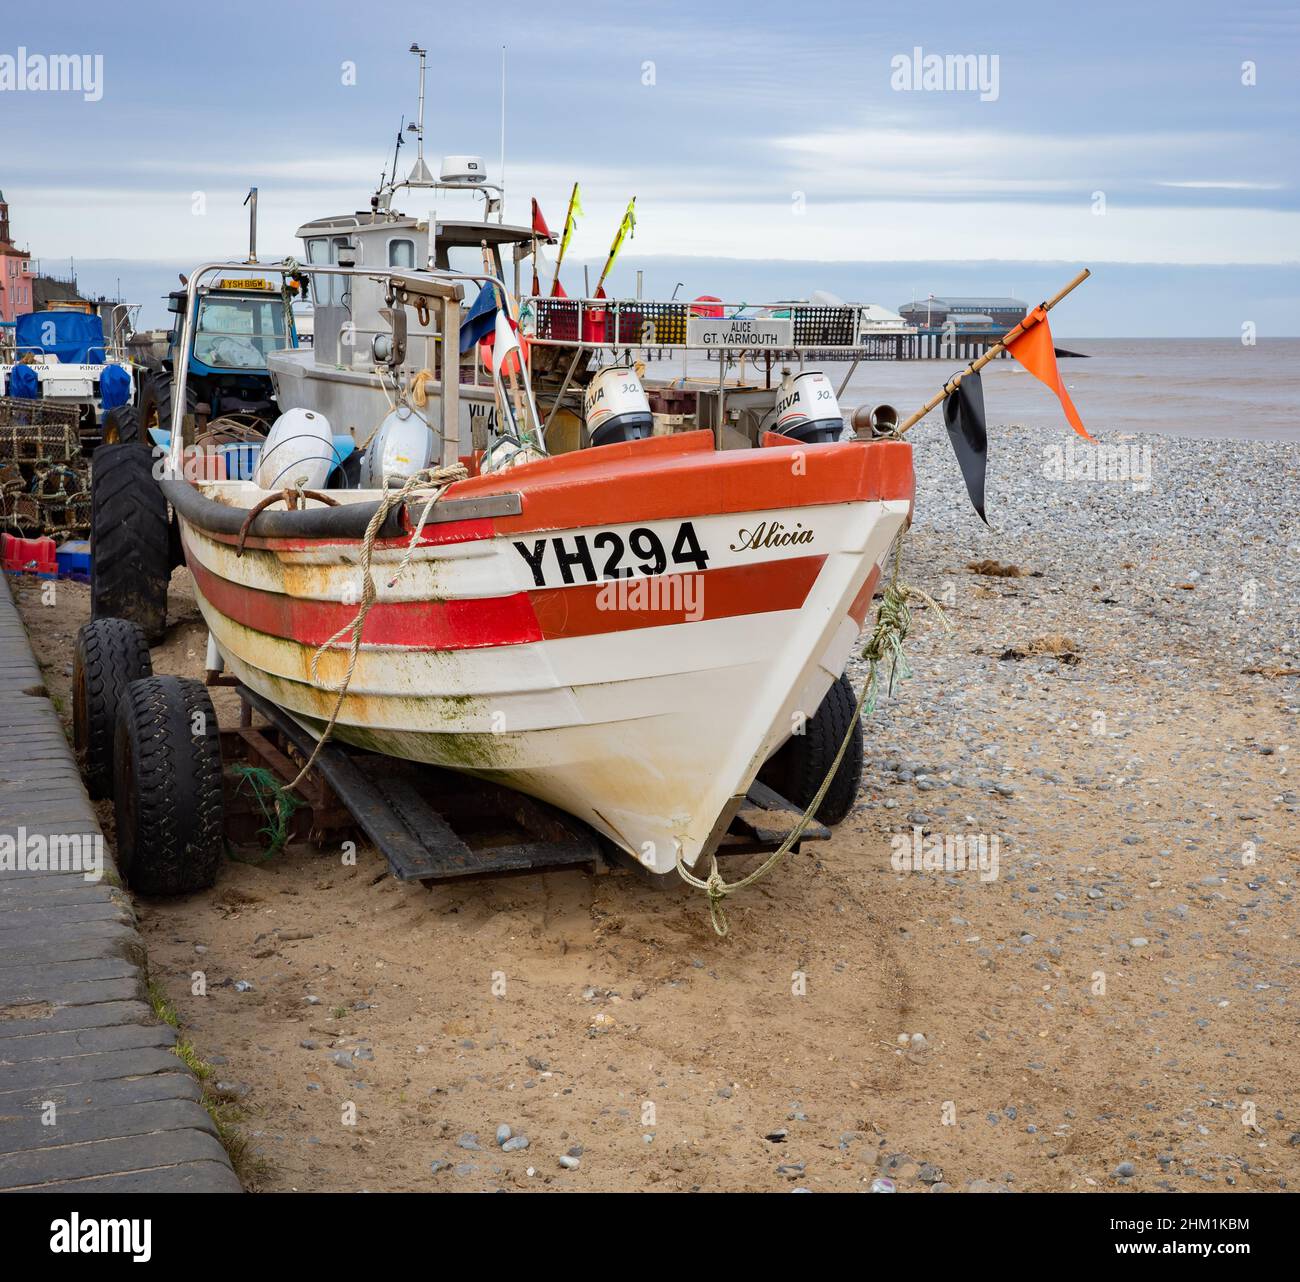 https://c8.alamy.com/comp/2HM1KBM/cromer-norfolk-uk-february-2022-crab-fishing-boats-fishing-gear-tackle-equipment-and-tractors-used-in-the-crab-fishing-industry-in-the-seaside-2HM1KBM.jpg